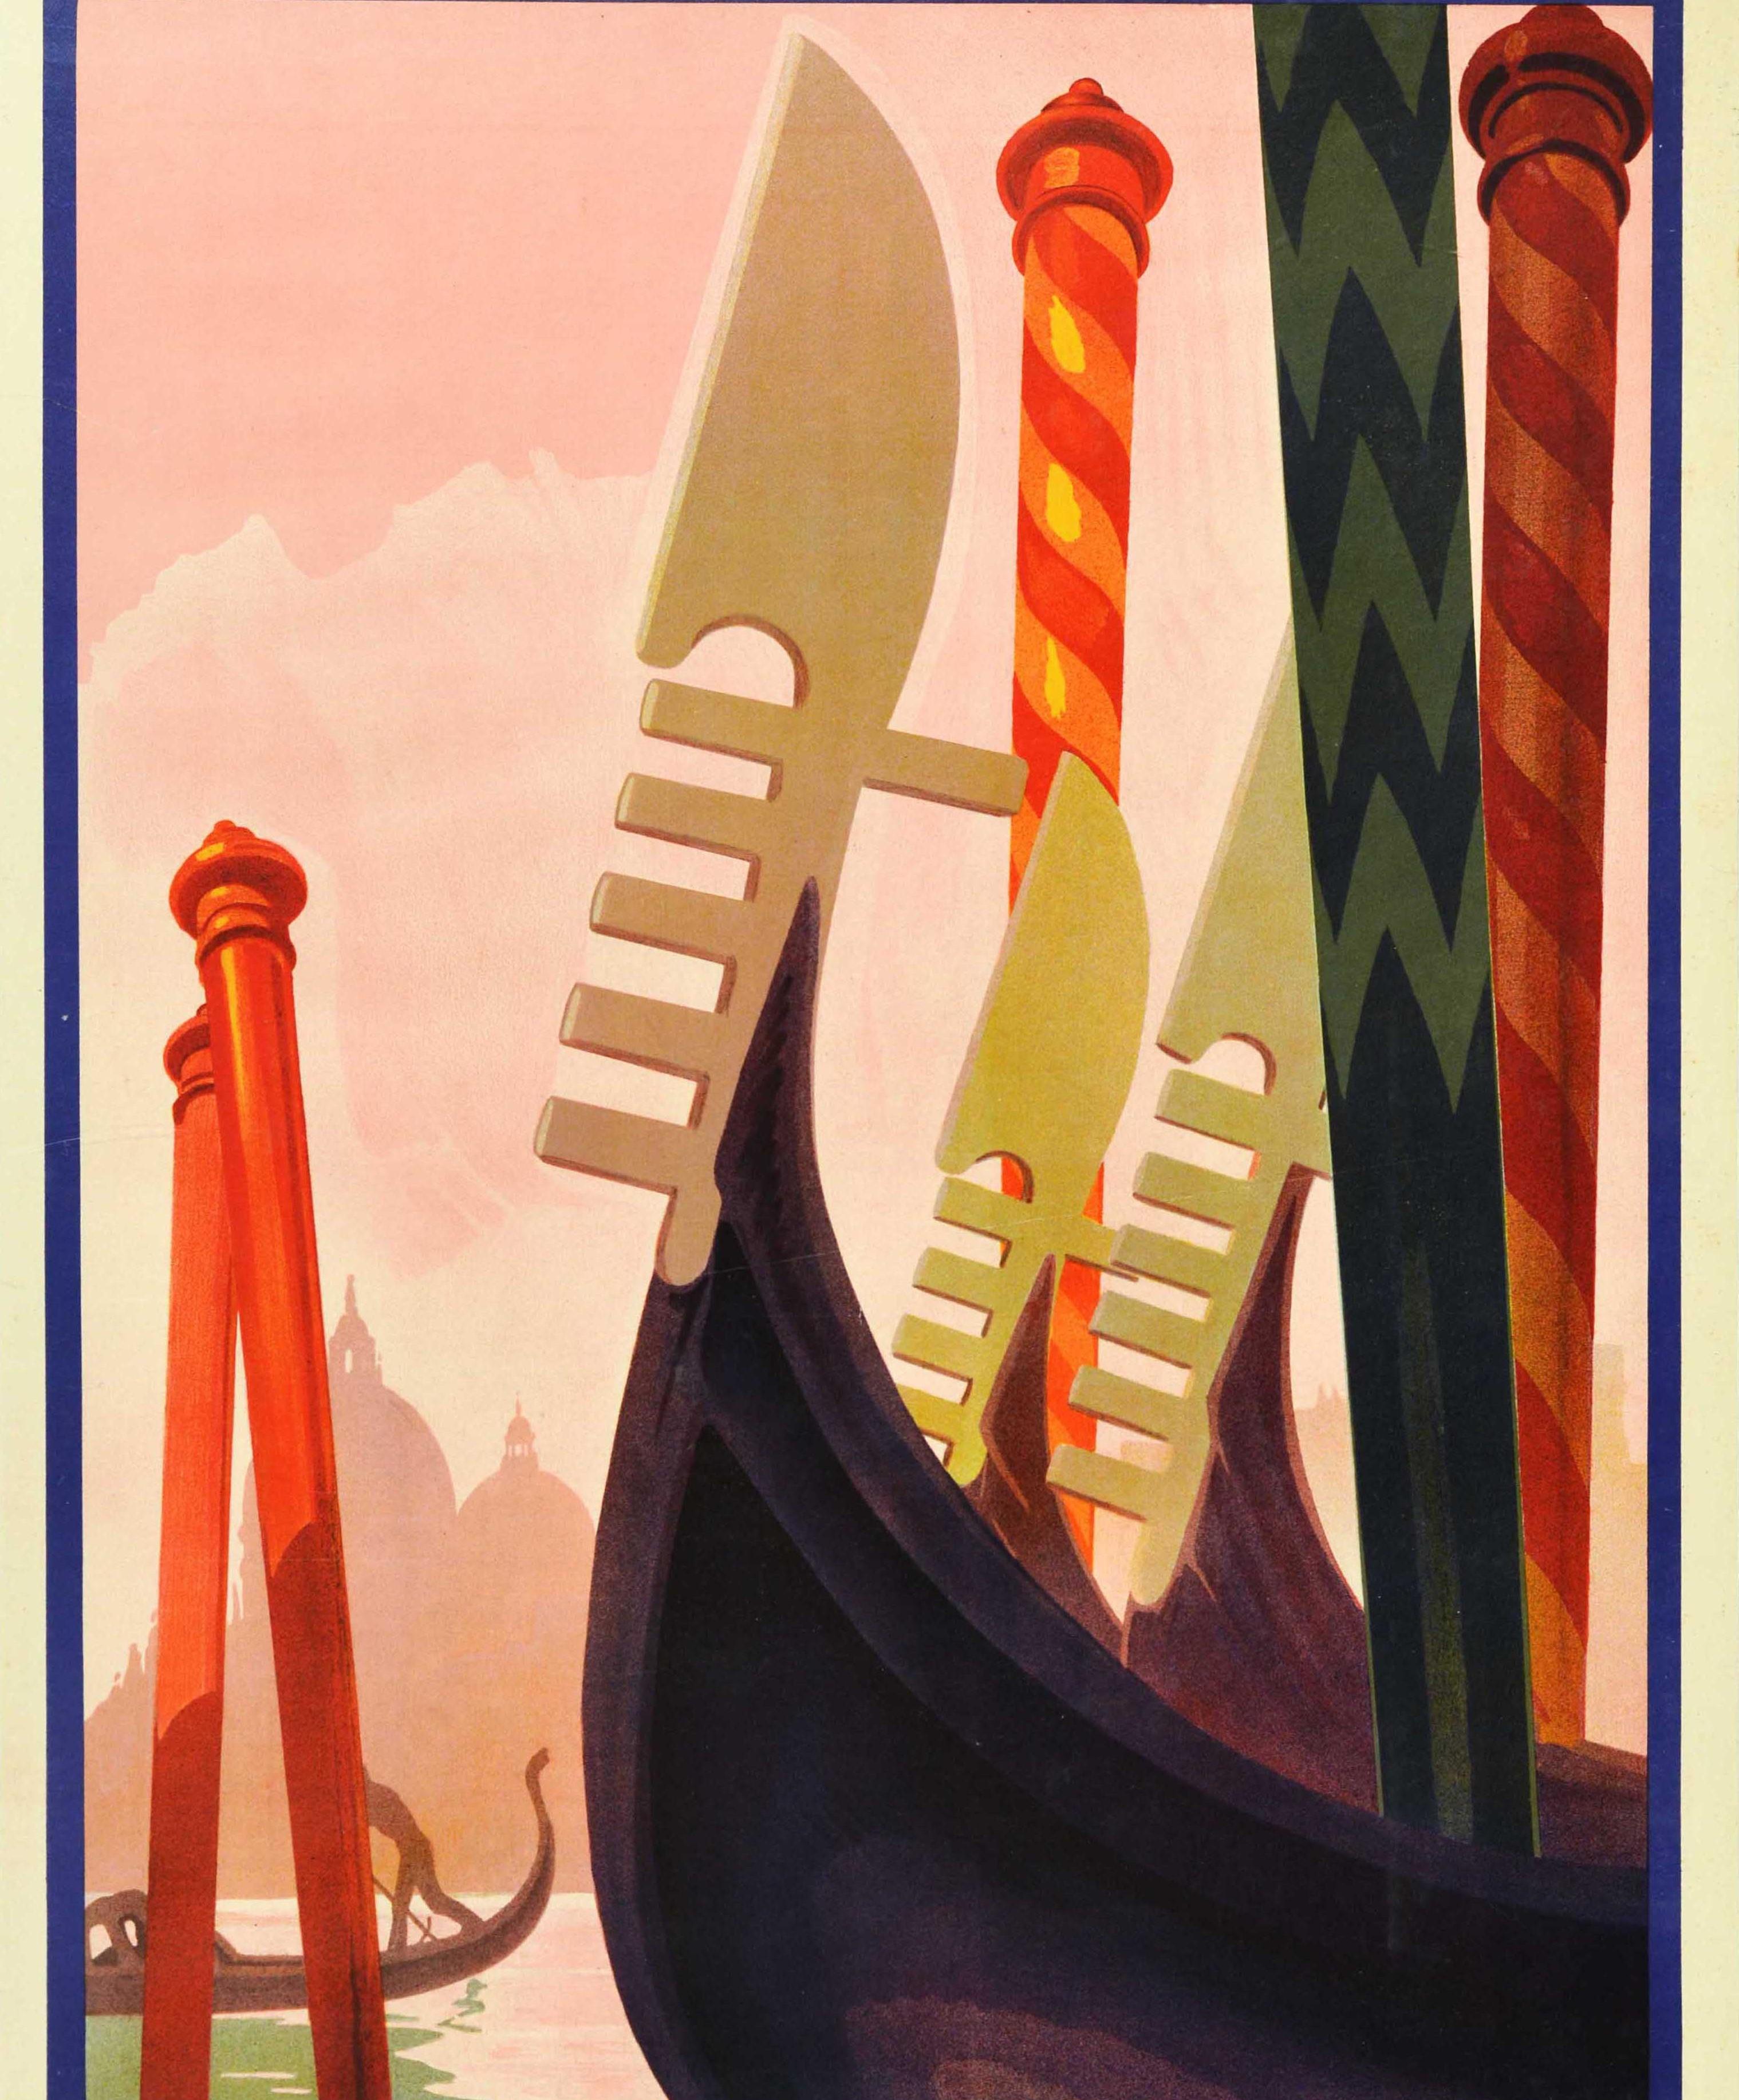 Original vintage travel advertising poster published by the Italian Tourism Board ENIT to promote the historical city of Venice / Venezia featuring a view through gondola boat moorings across the Grand Canal to a gondolier rowing a boat in front of